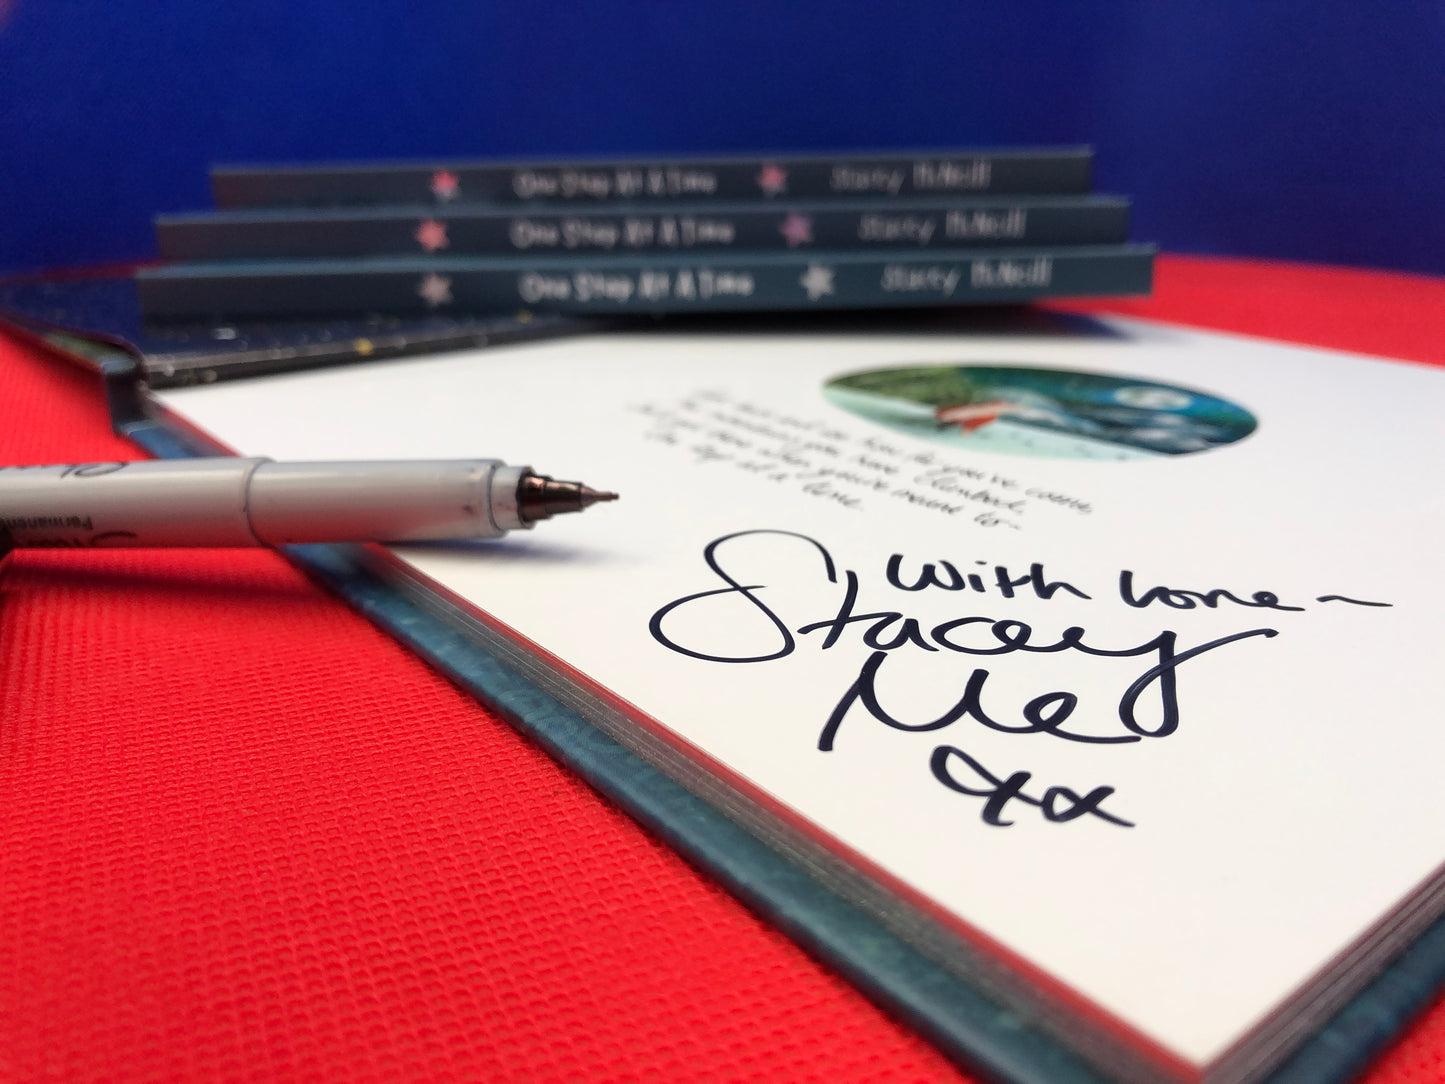 Hardback Gift Book - SIGNED - One Step At A Time